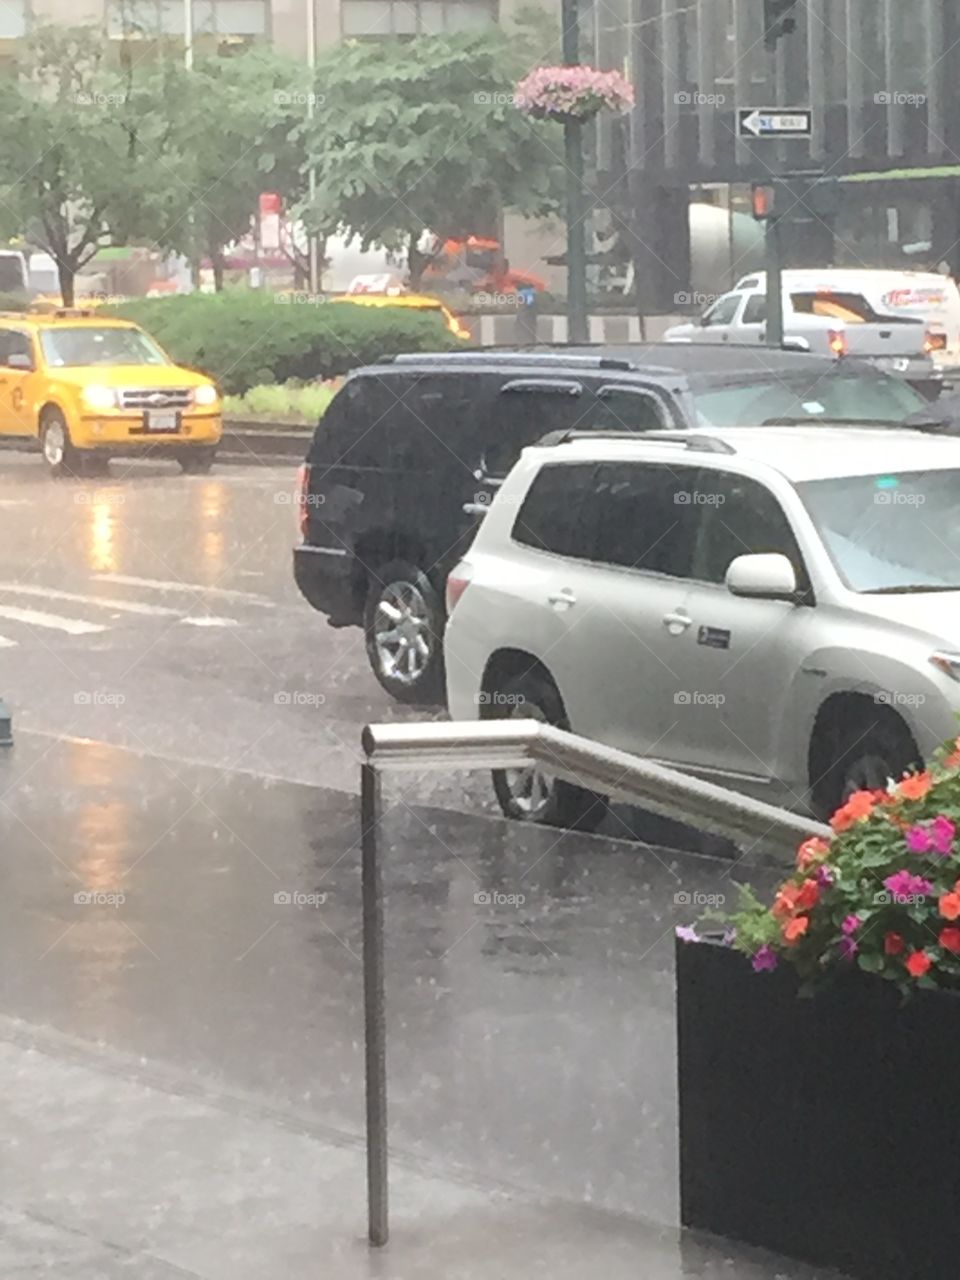 SUMMER SHOWERS . Summer showers in NYC

